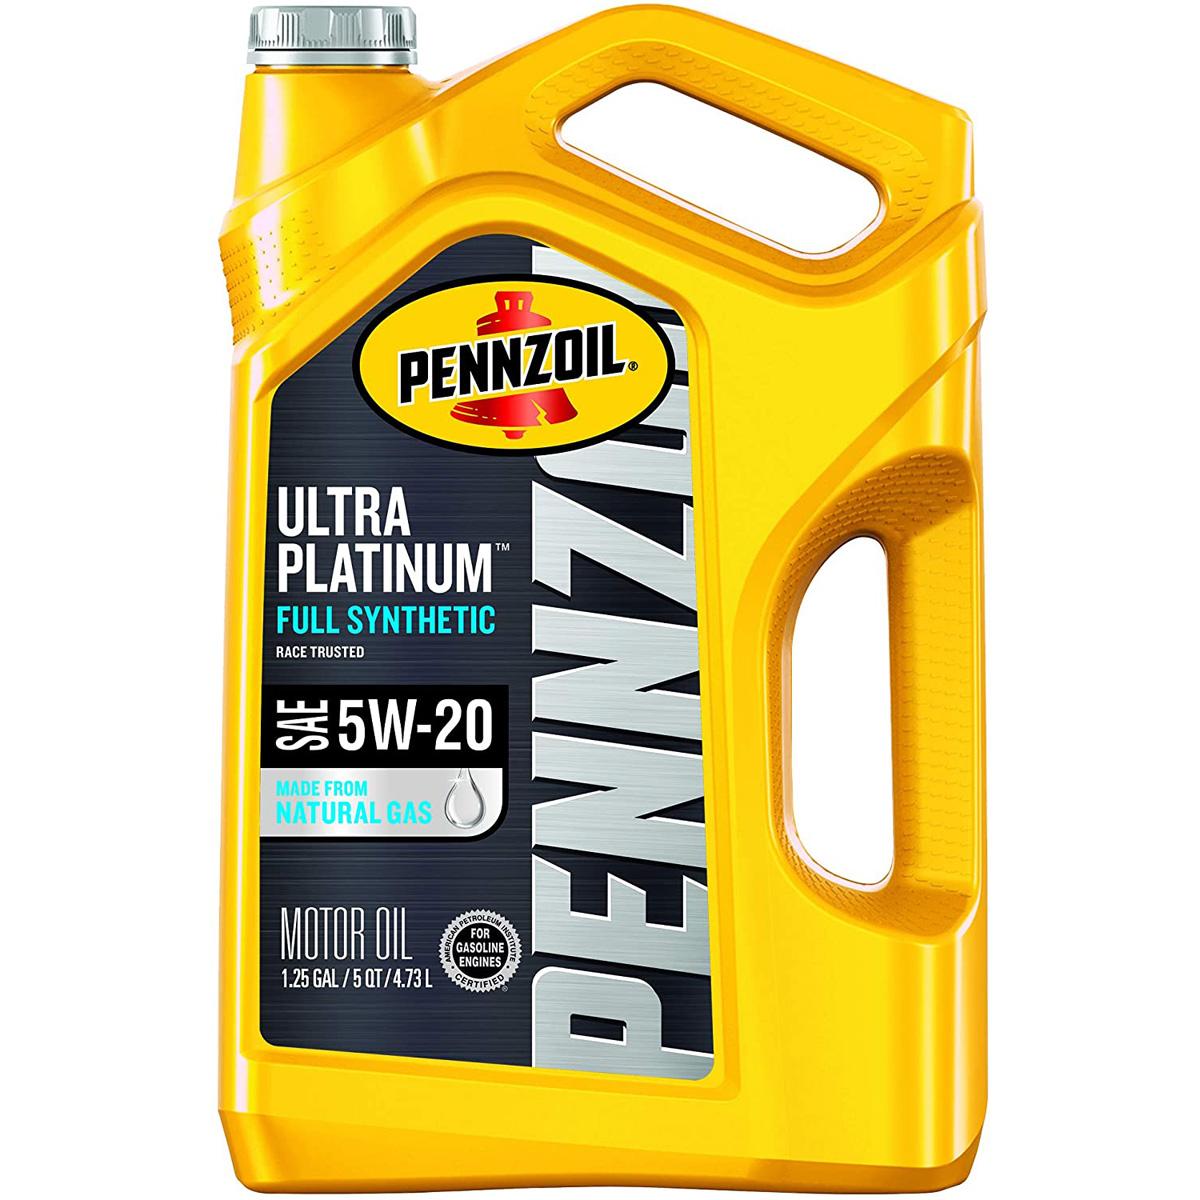 10Q Pennzoil Platinum Full Synthetic Motor Oil with $22 Gift Card for $49.94 Shipped